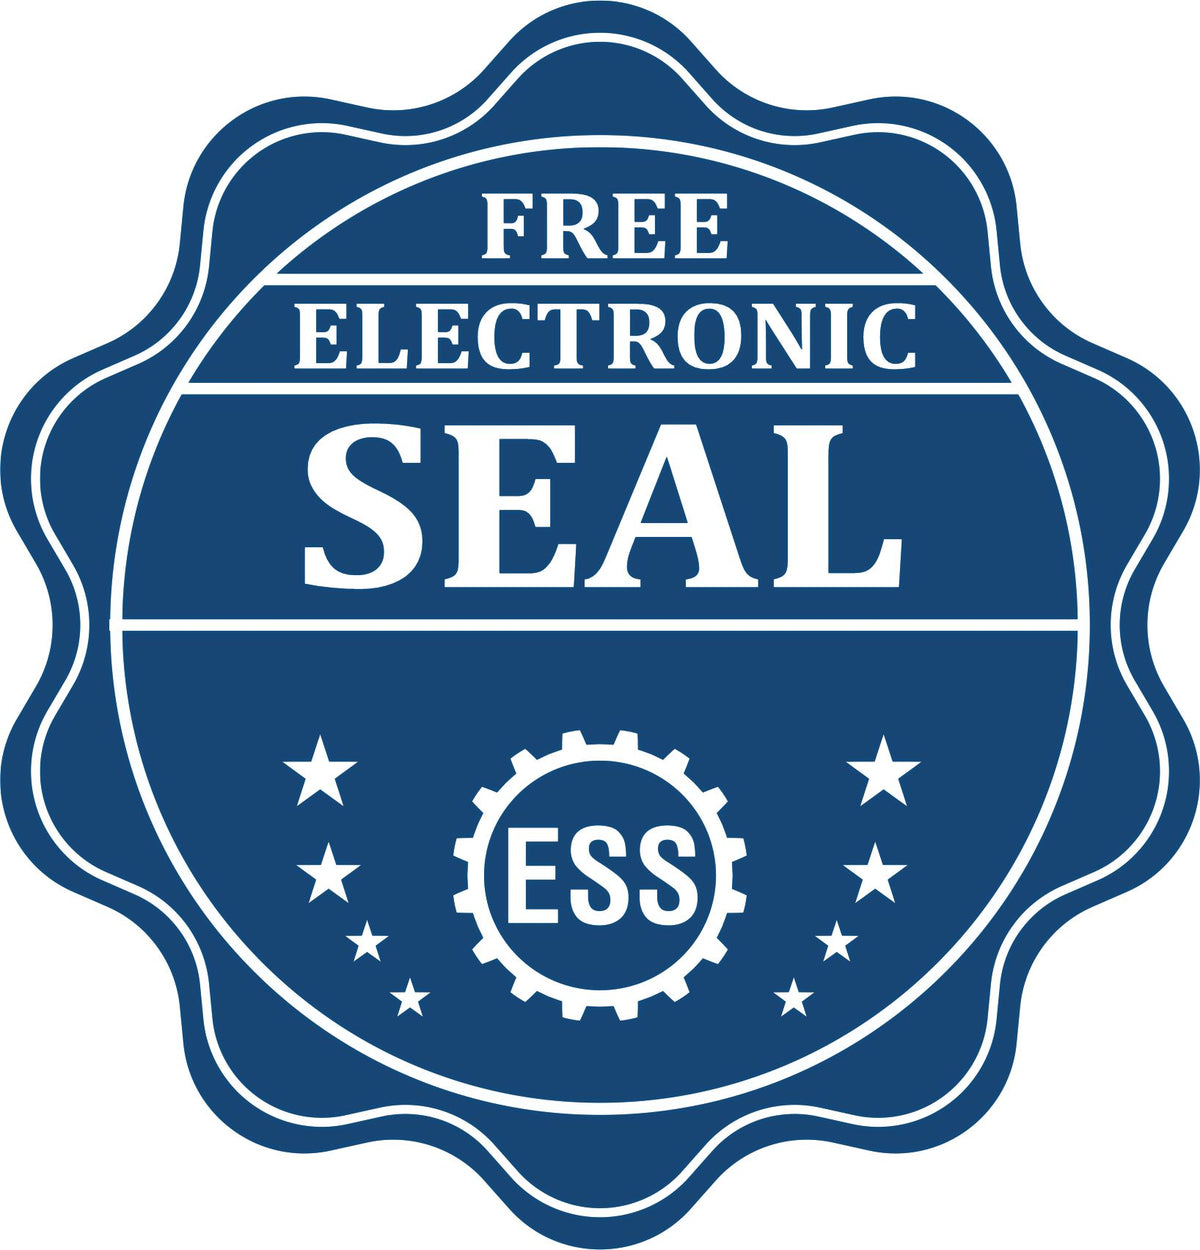 A badge showing a free electronic seal for the Heavy Duty Cast Iron New Hampshire Engineer Seal Embosser with stars and the ESS gear on the emblem.